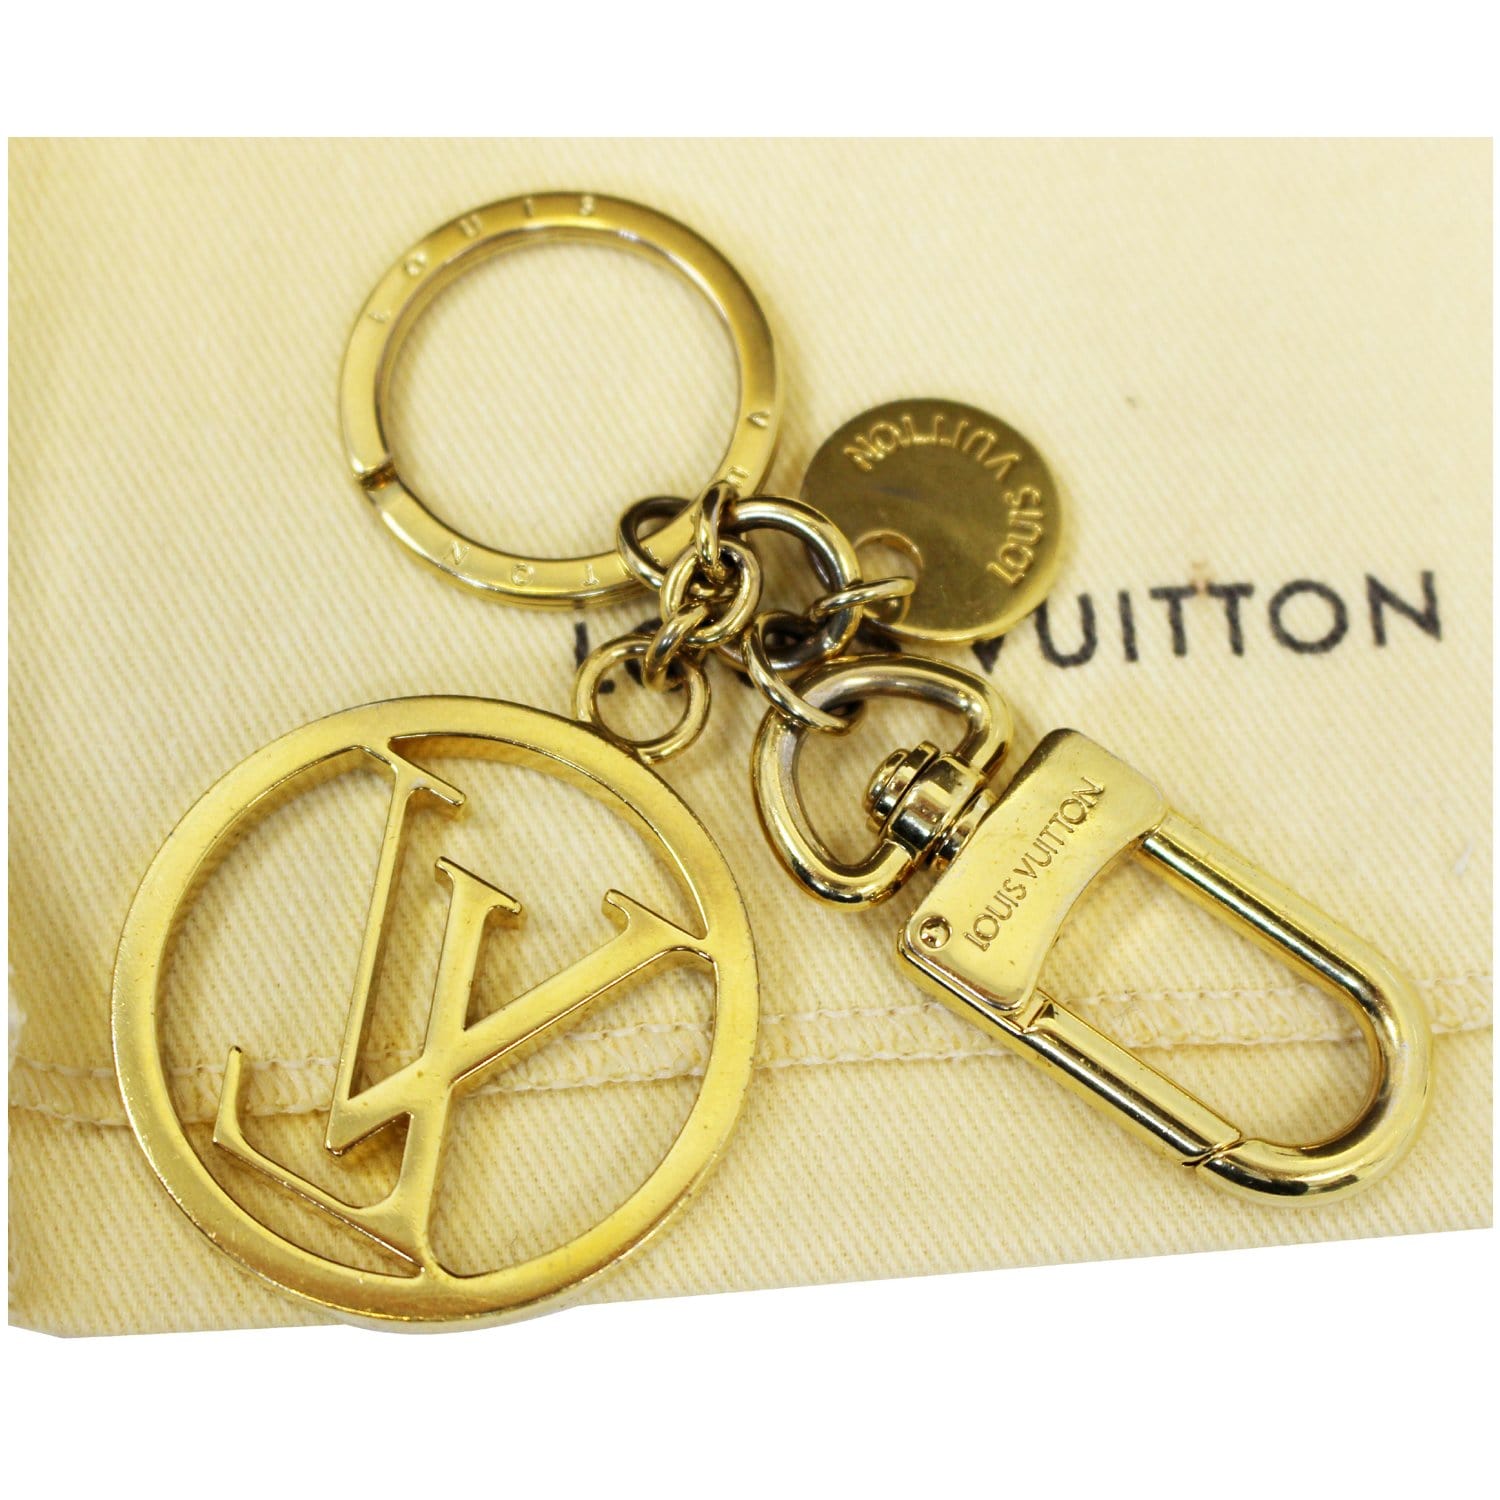 Louis Vuitton Key Holder/ Bag Charm ○ Labellov ○ Buy and Sell